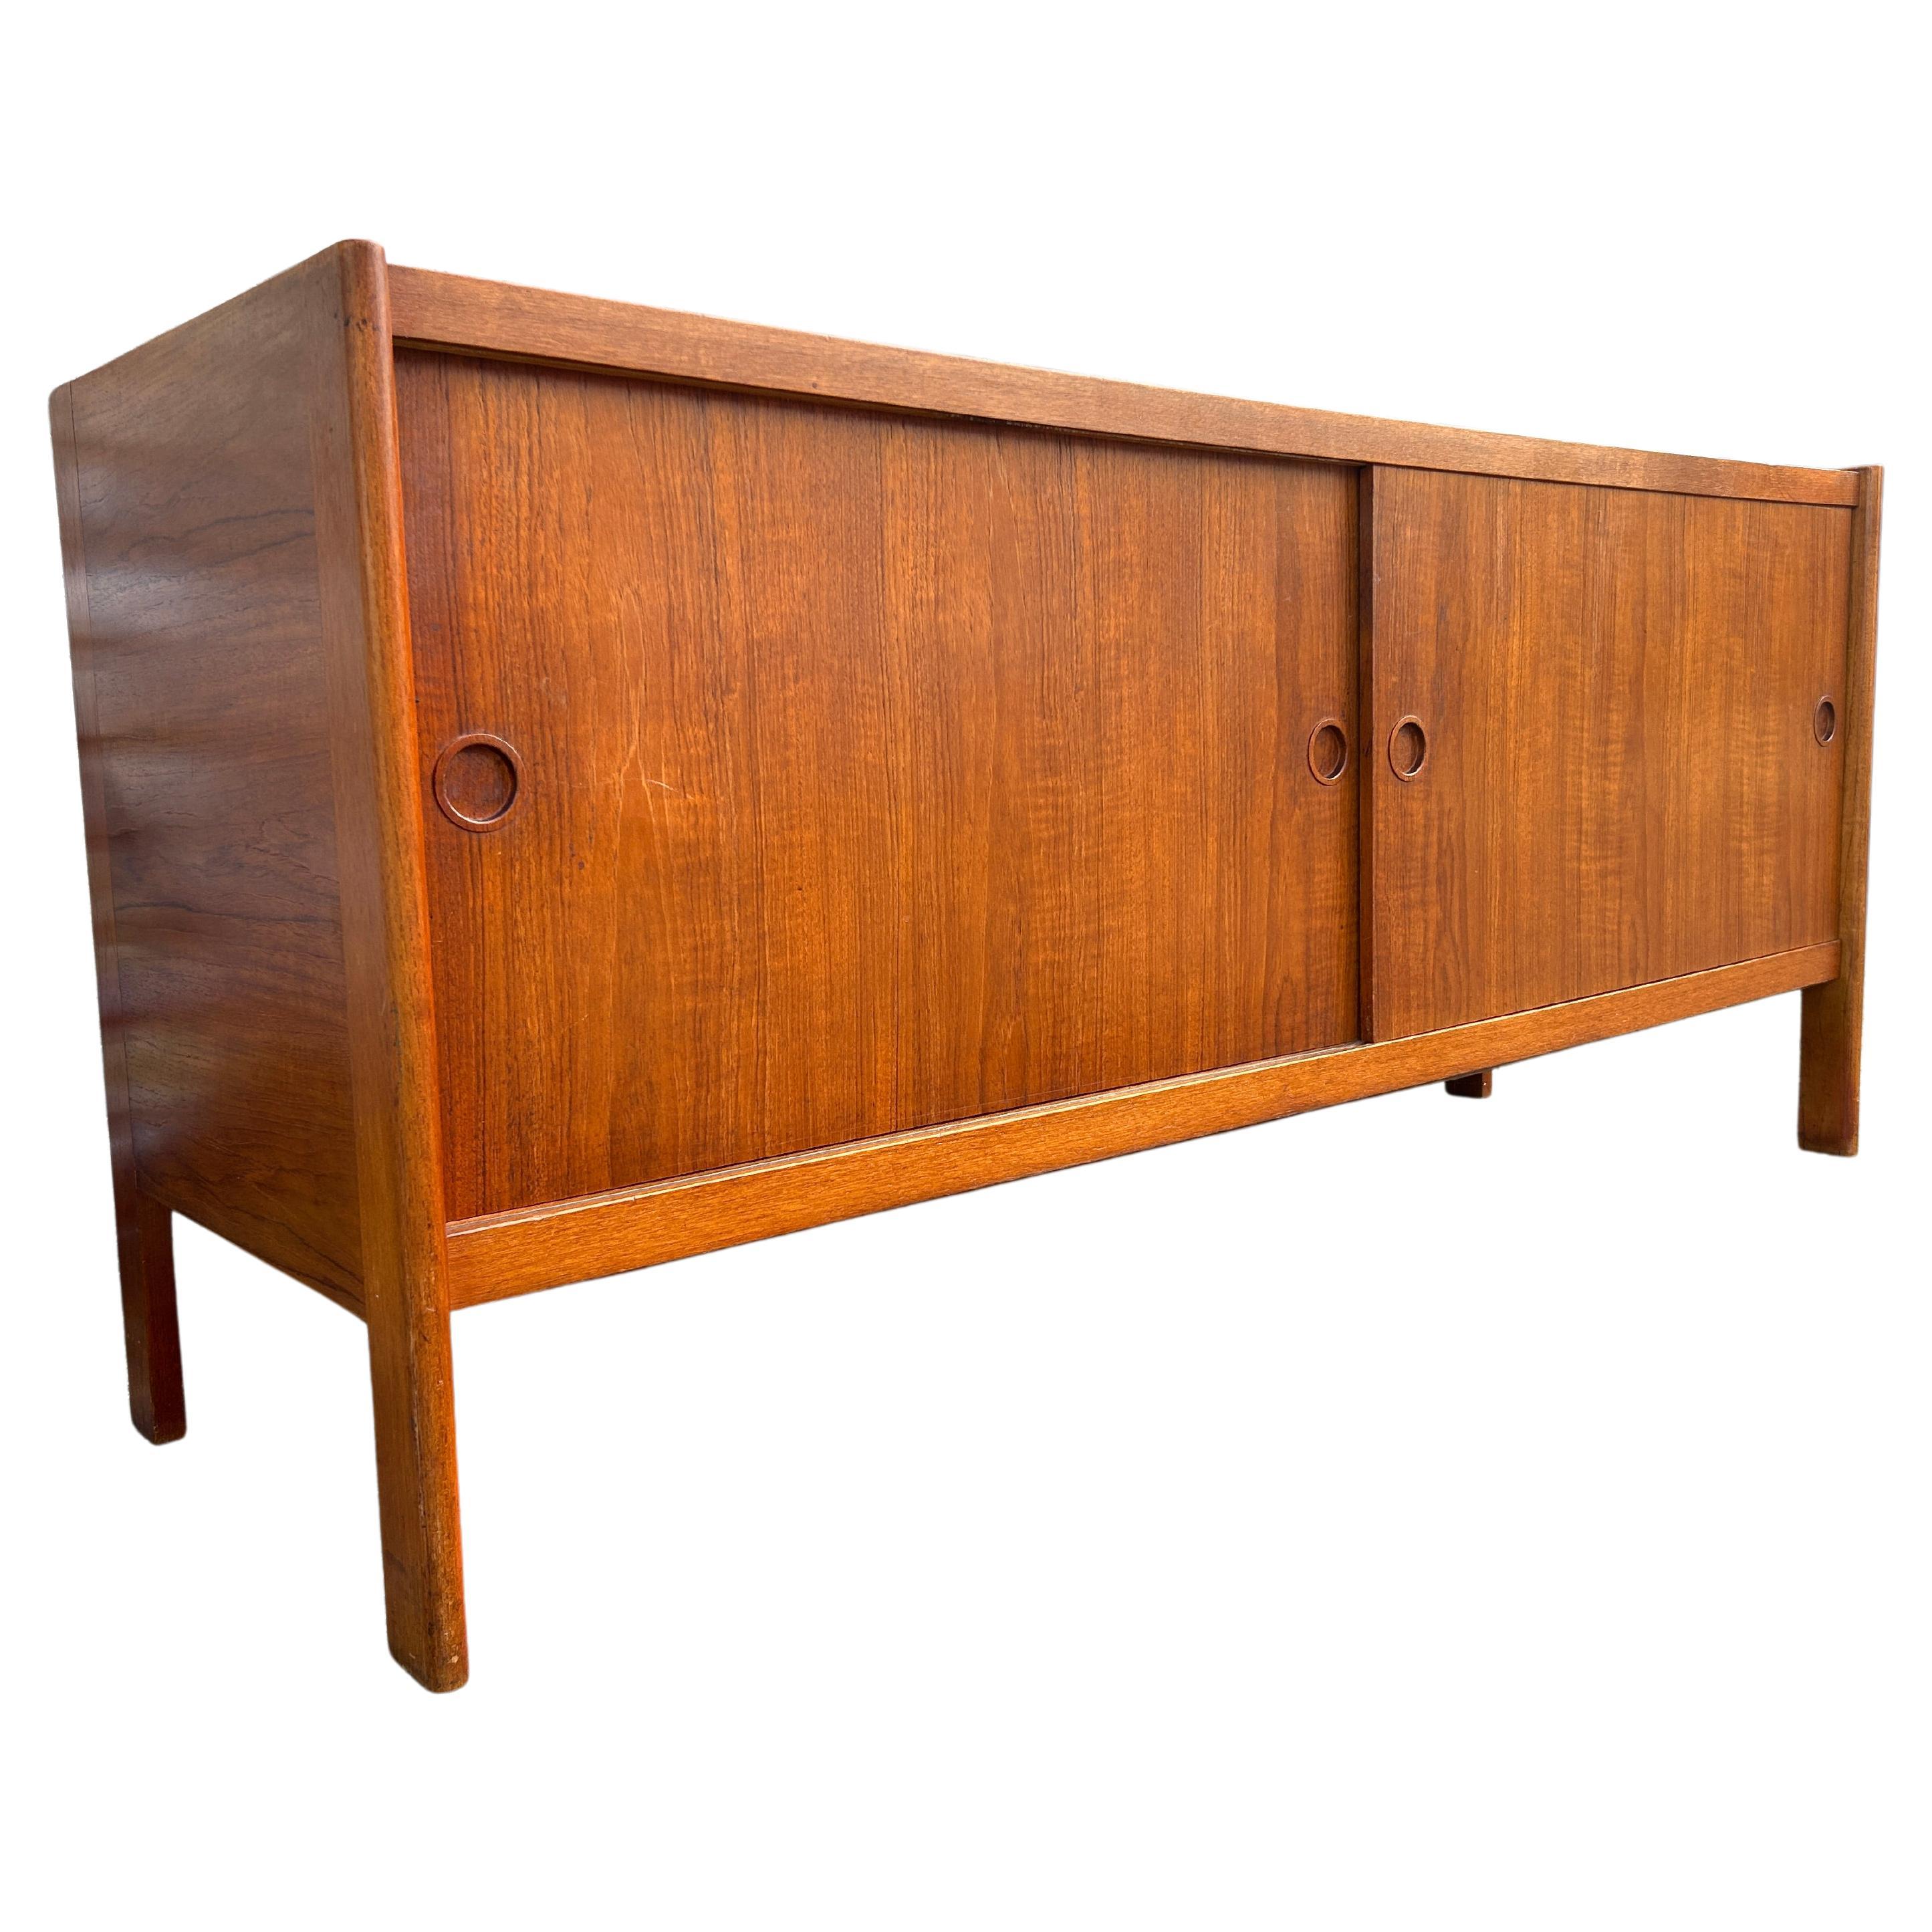 Midcentury Danish modern teak sliding door credenza by Poul Hundevad. Has 2 front sliding doors with round carved teak handles. Has 2 adjustable shelves w/pins in each section also has 1 narrow teak drawer on the right top of inside the credenza.